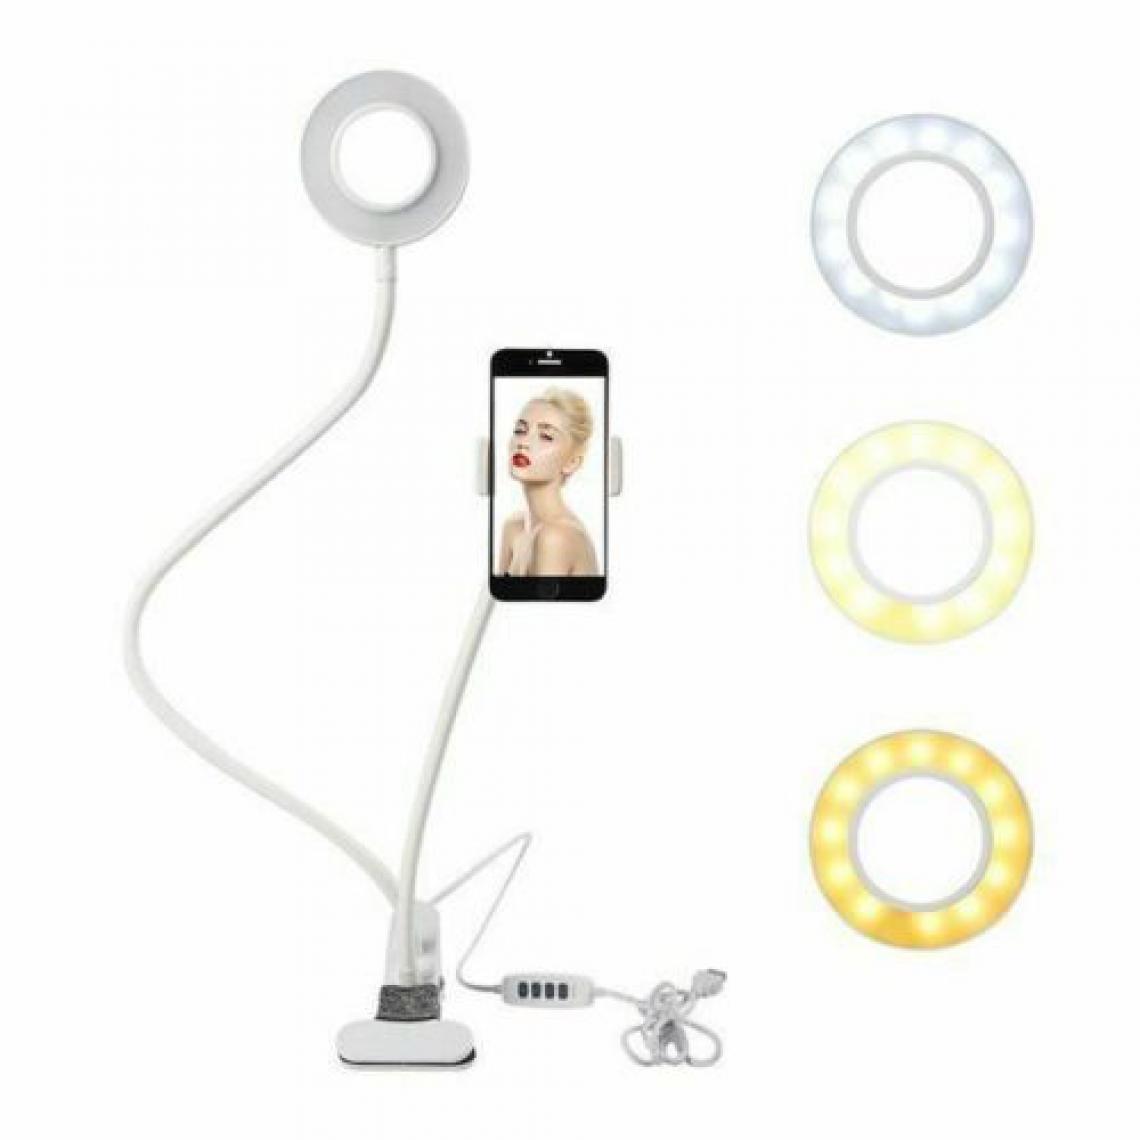 Ozzzo - Stand support bureau selfie led ozzzo blanc pour APPLE IPHONE 6 6S - Station d'accueil smartphone